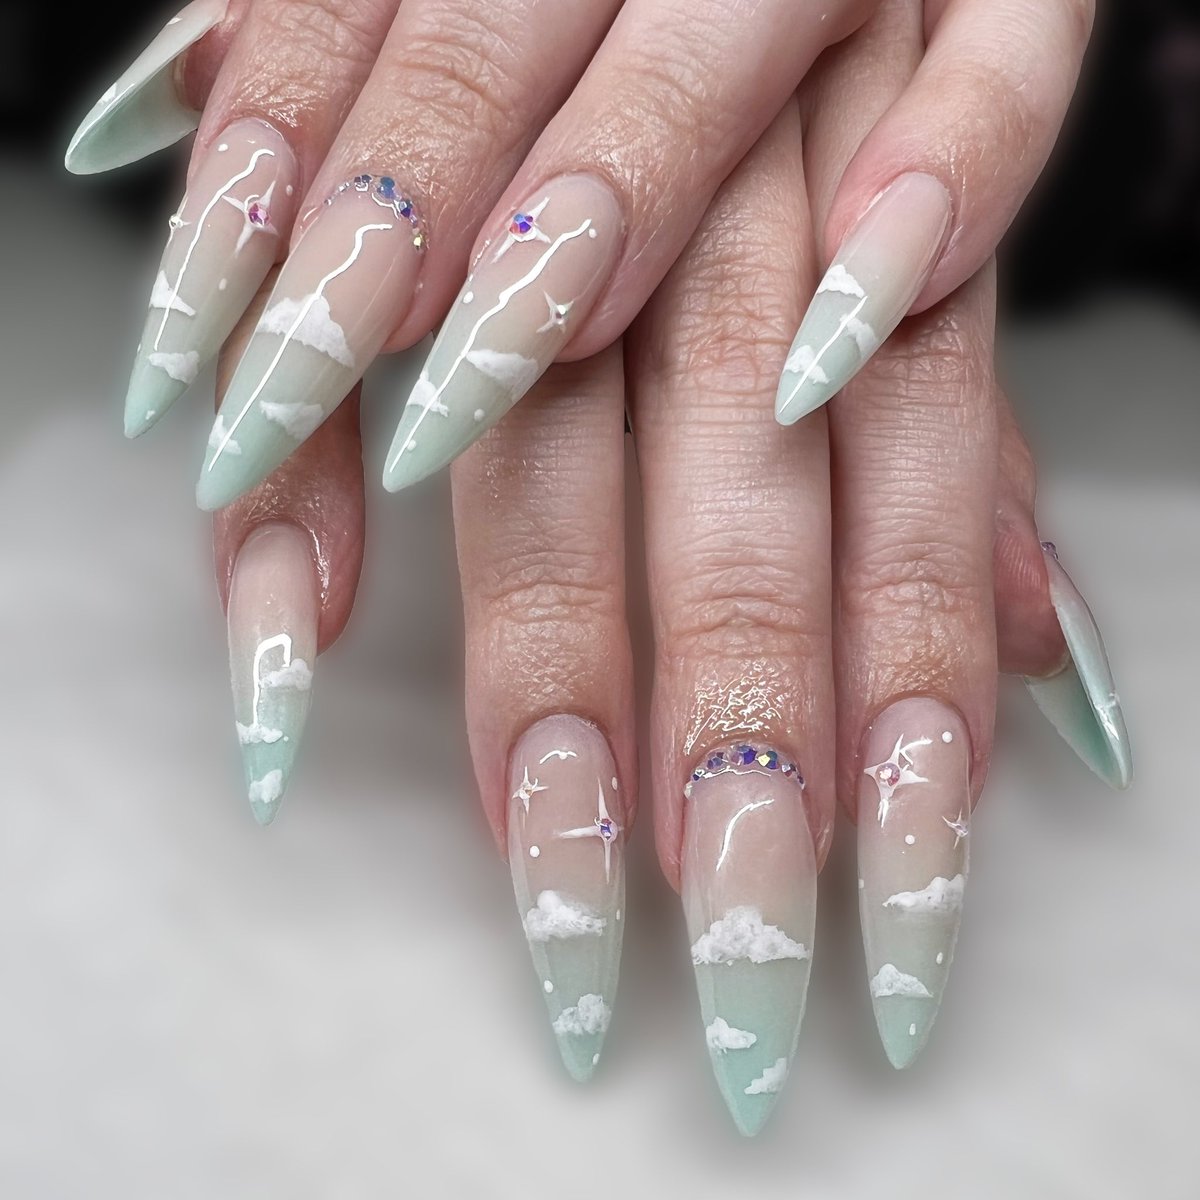 I did my friends nails yesterday 💅. She wanted almond pastel nails with clouds. So excited to finally have someone I can practice on, because I kinda wanna do it professionally one day. I still have to learn a lot tho! ❤️ #nails #nailart